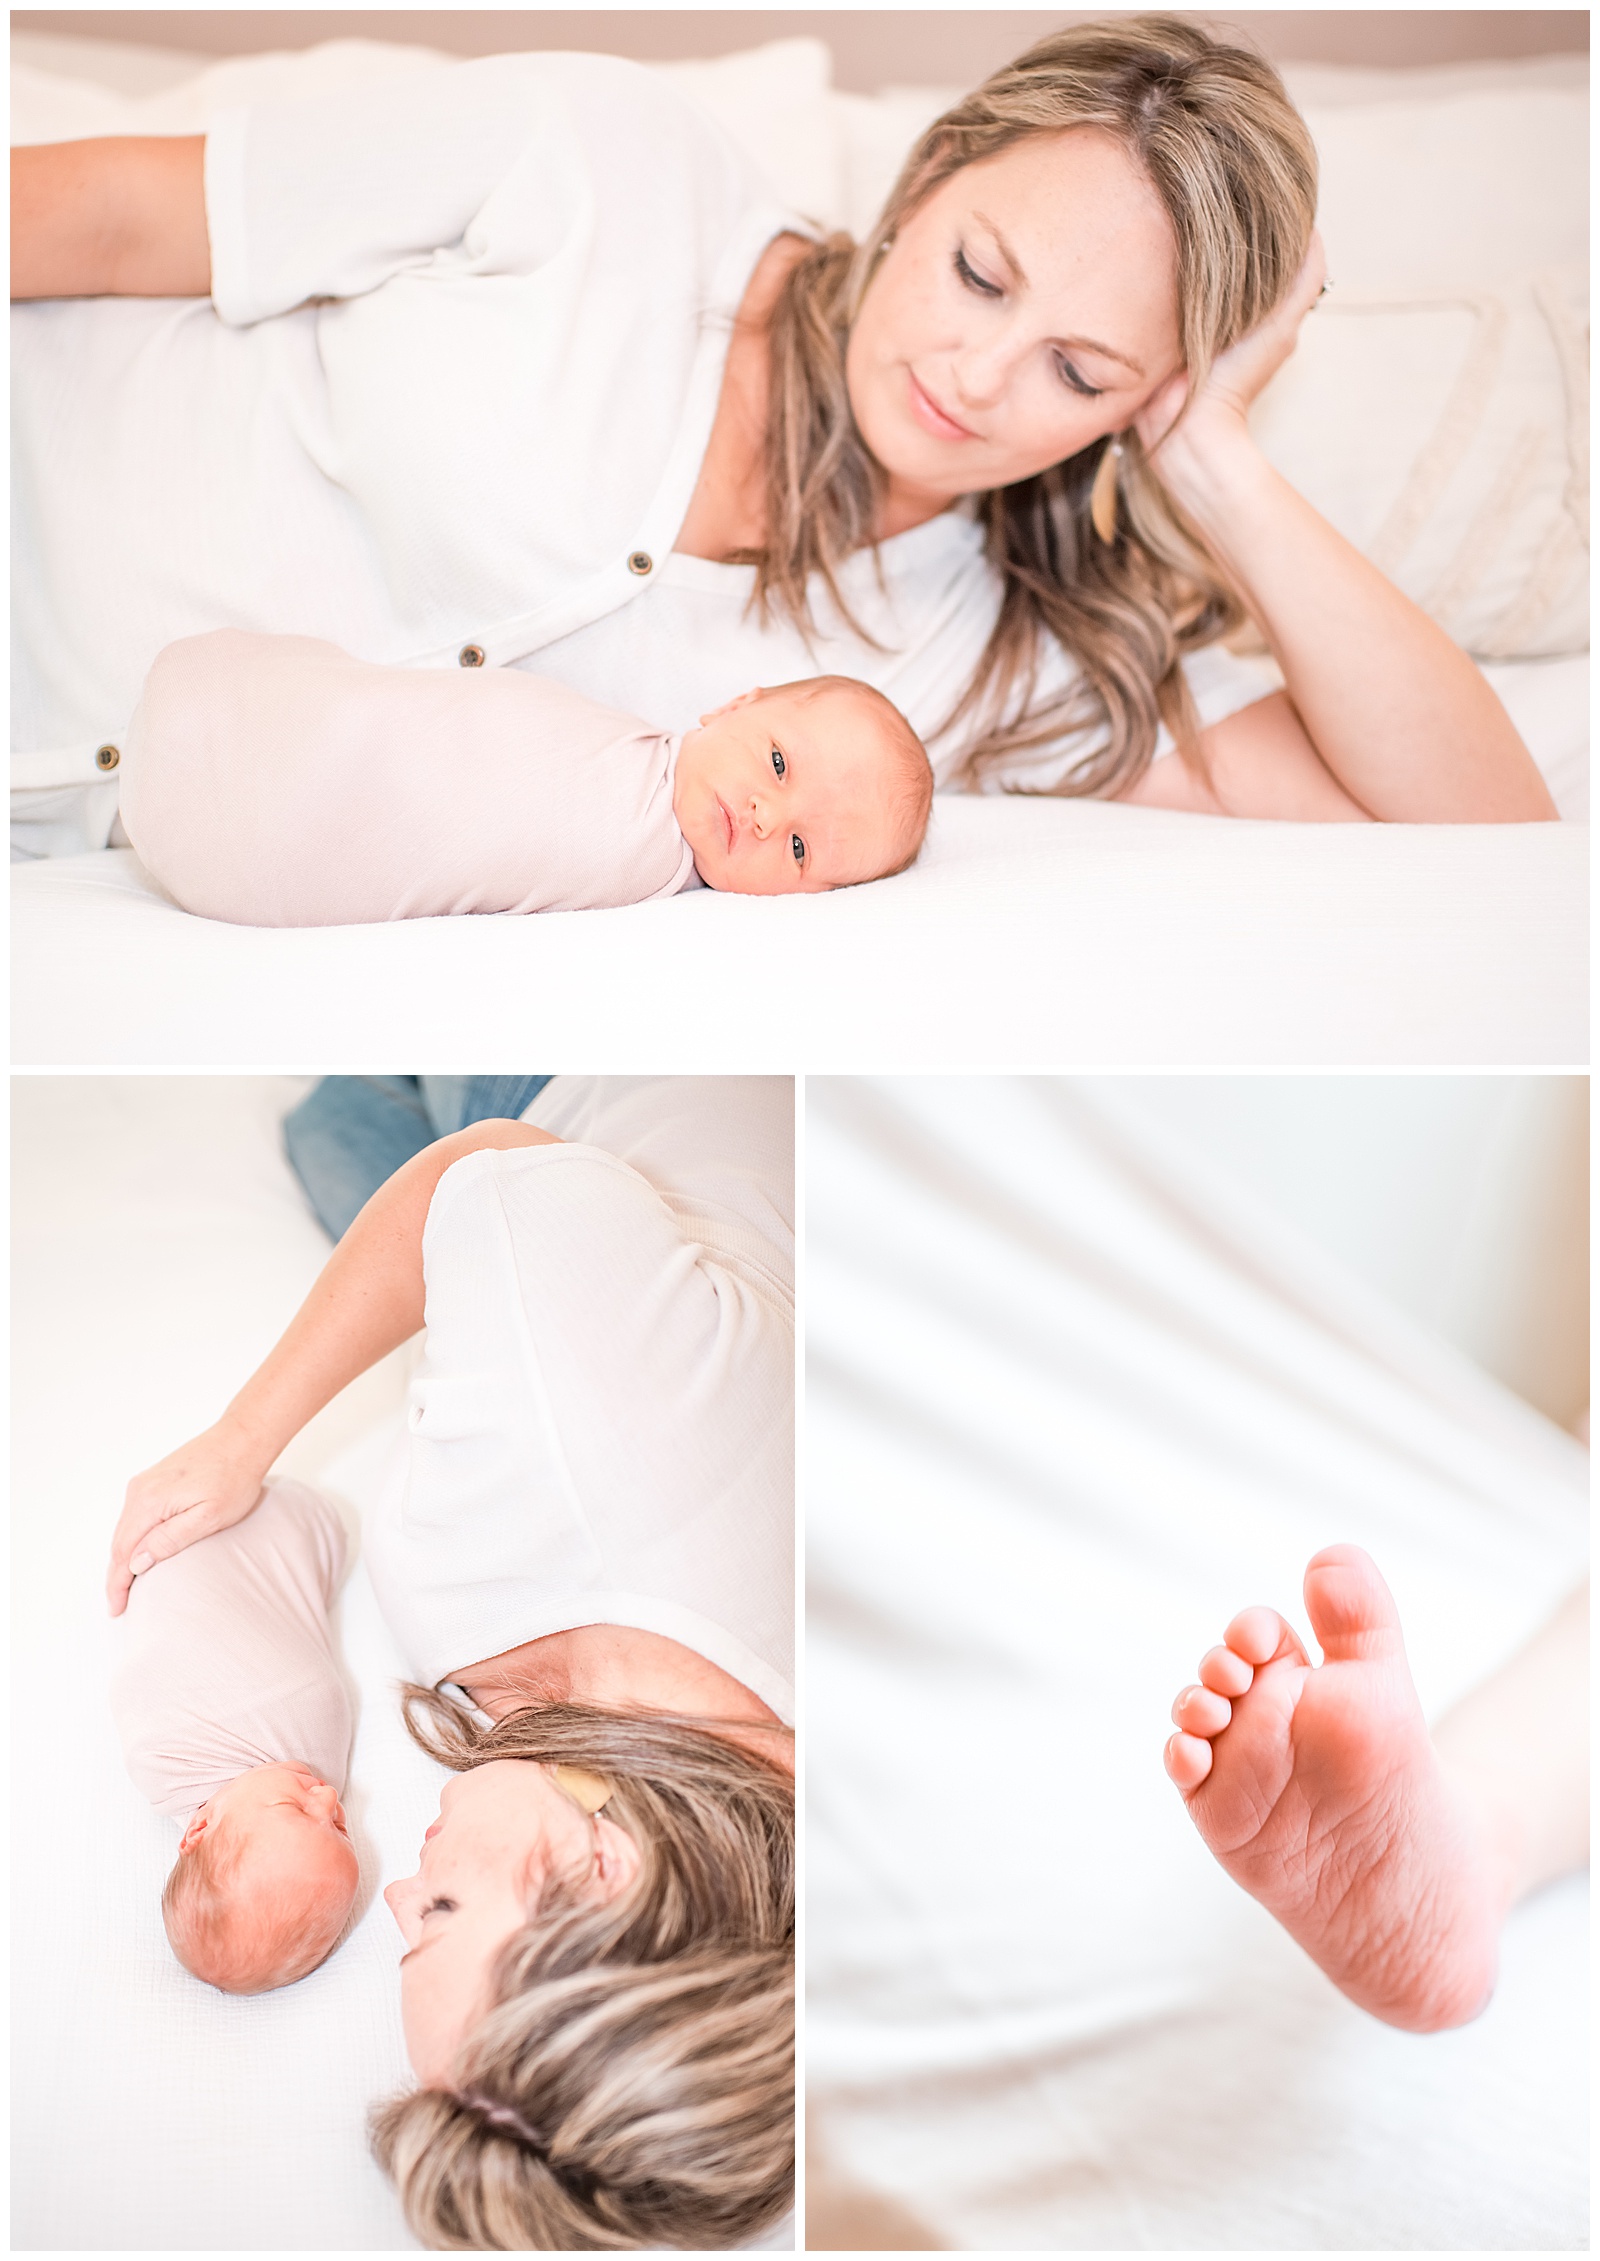 light and airy photographer
mom and baby tiny feet